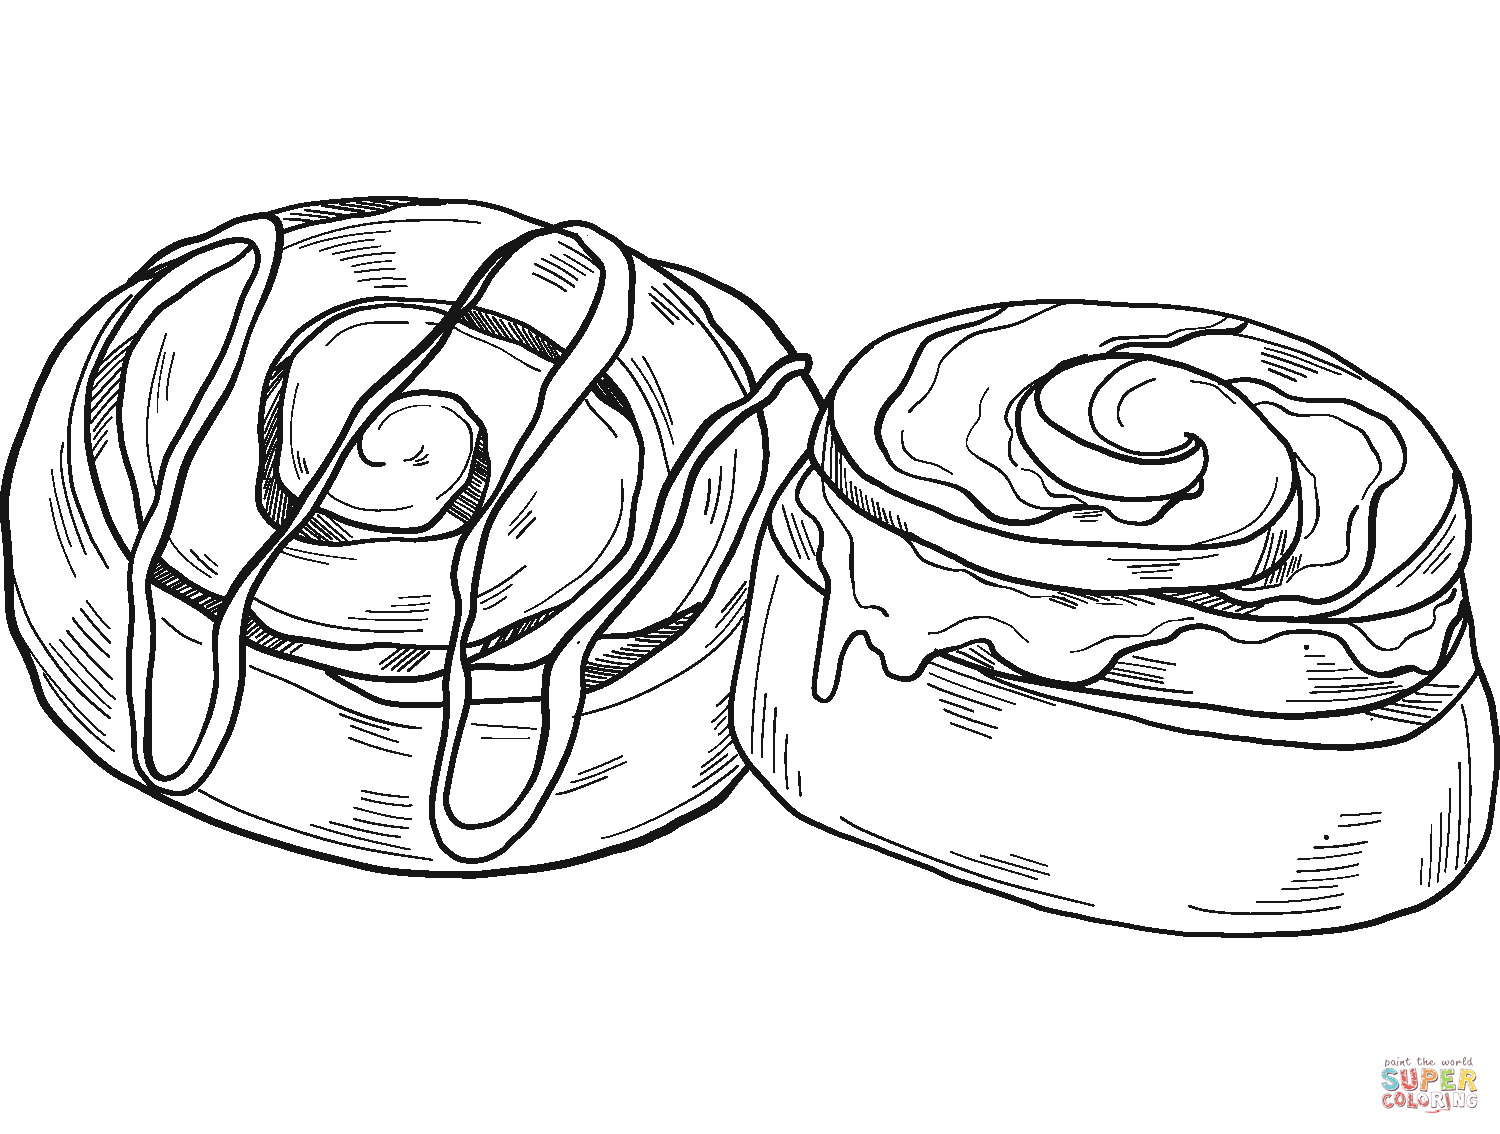 Cinnamon Rolls coloring page | Free Printable Coloring Pages